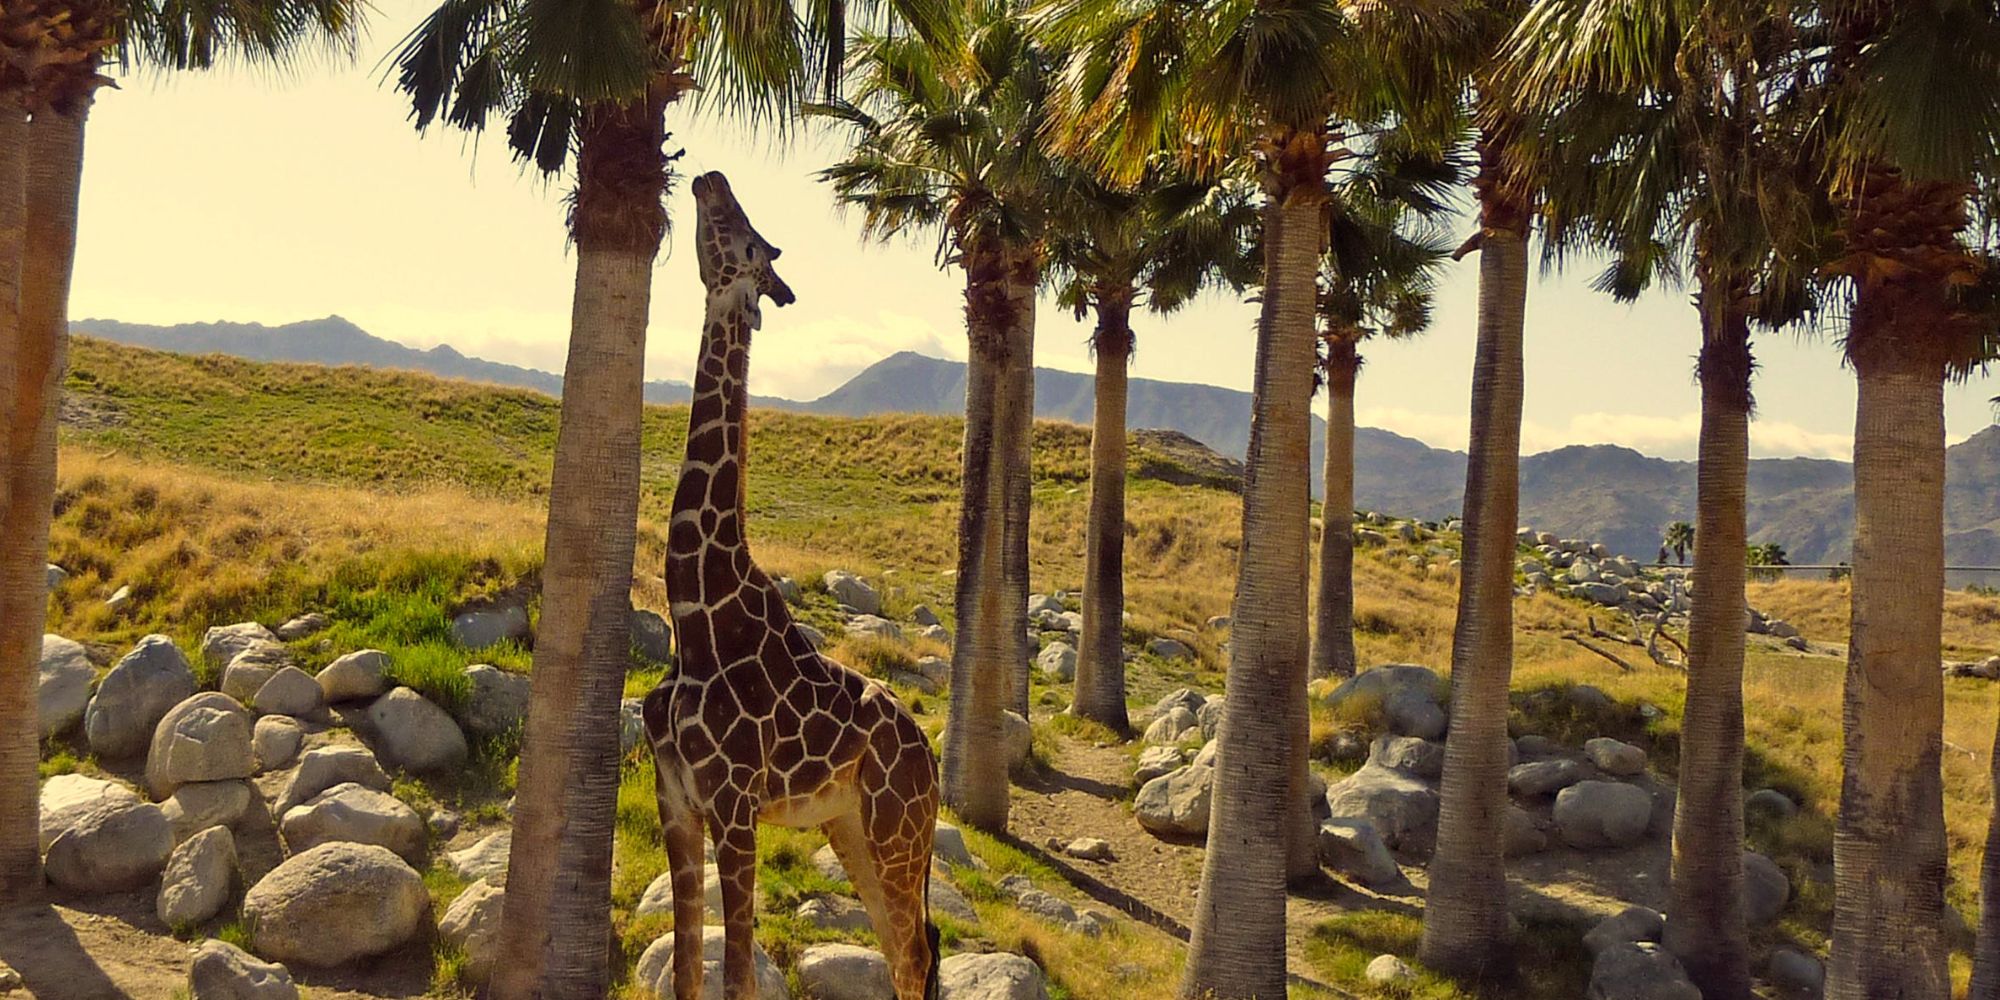 Spend time at The Living Desert Zoo & Gardens